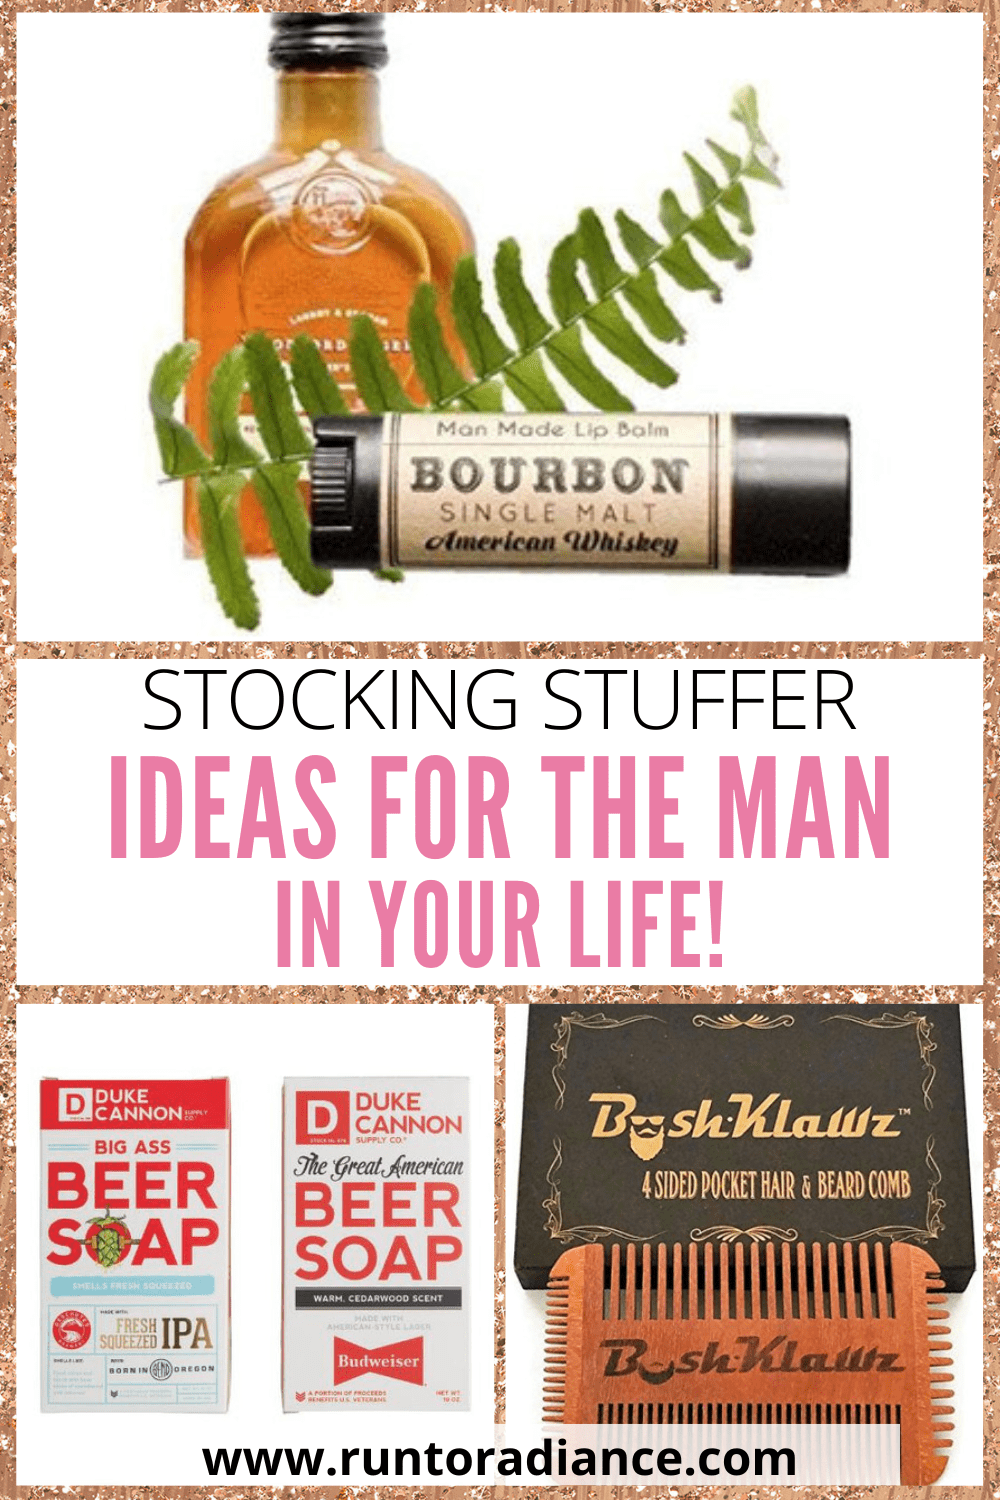 Last Minute Stocking Stuffers For Wine, Beer, and Cocktail Lovers